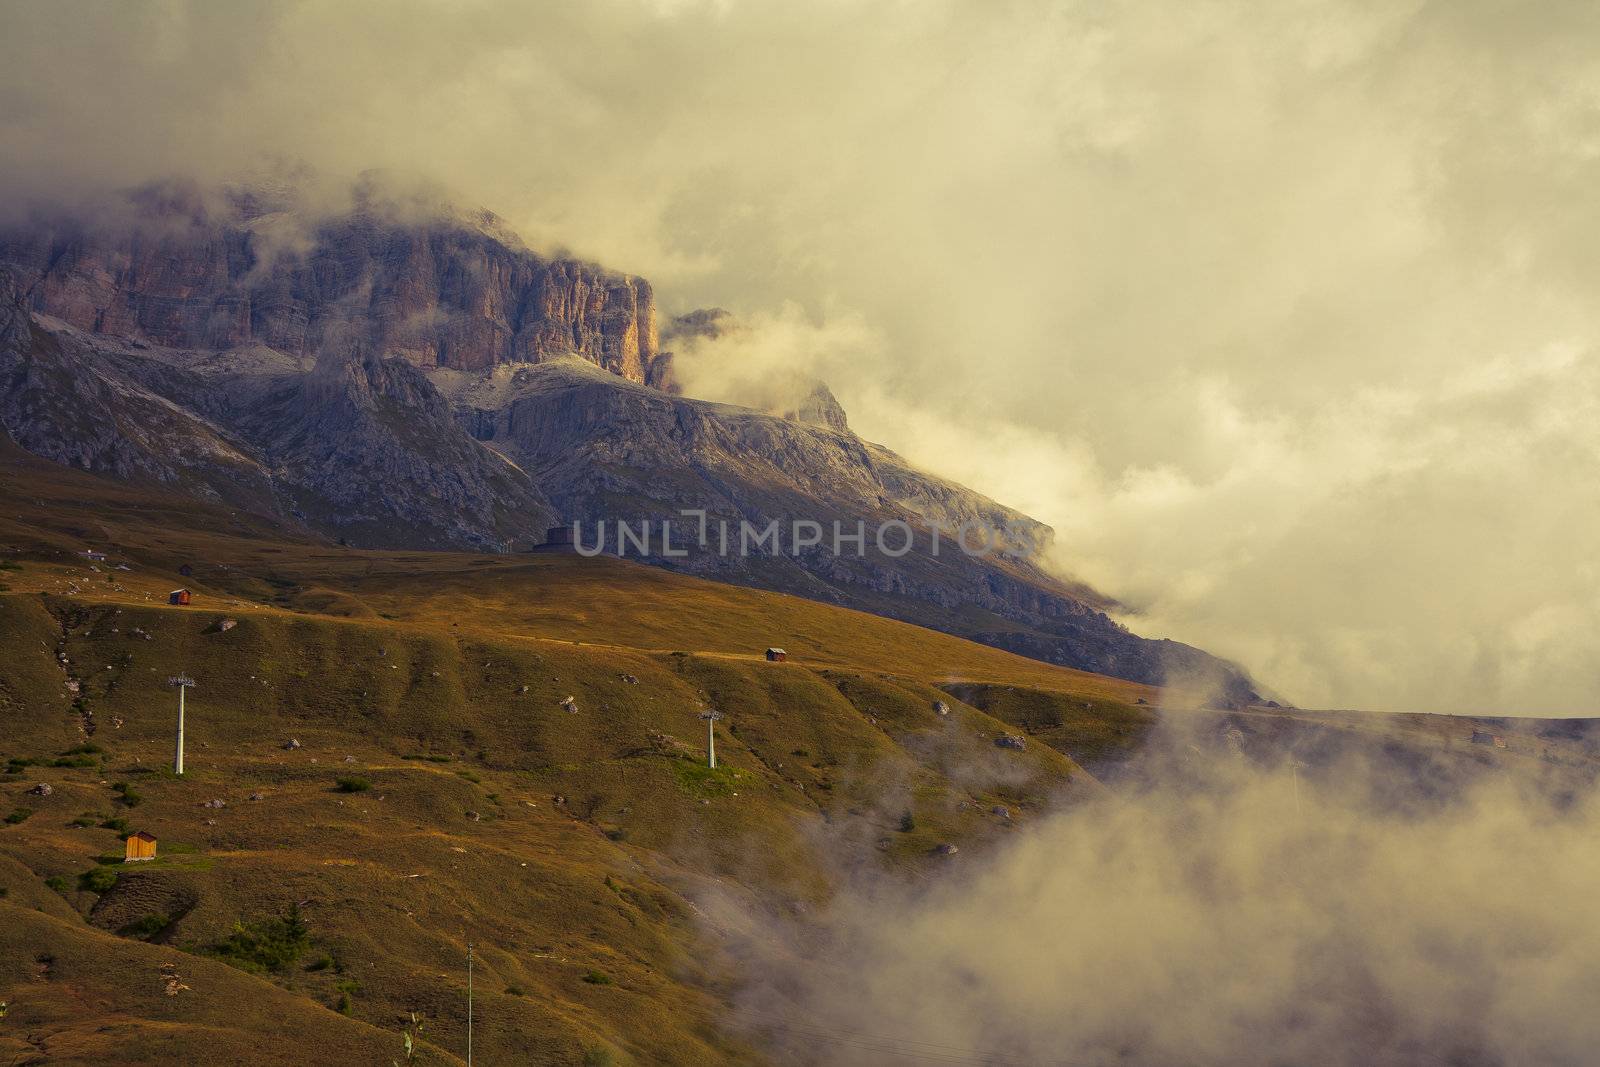 Early September morning with low hanging clouds in the Dolomites. Image is cross processed and a little film grain added to reflect age.